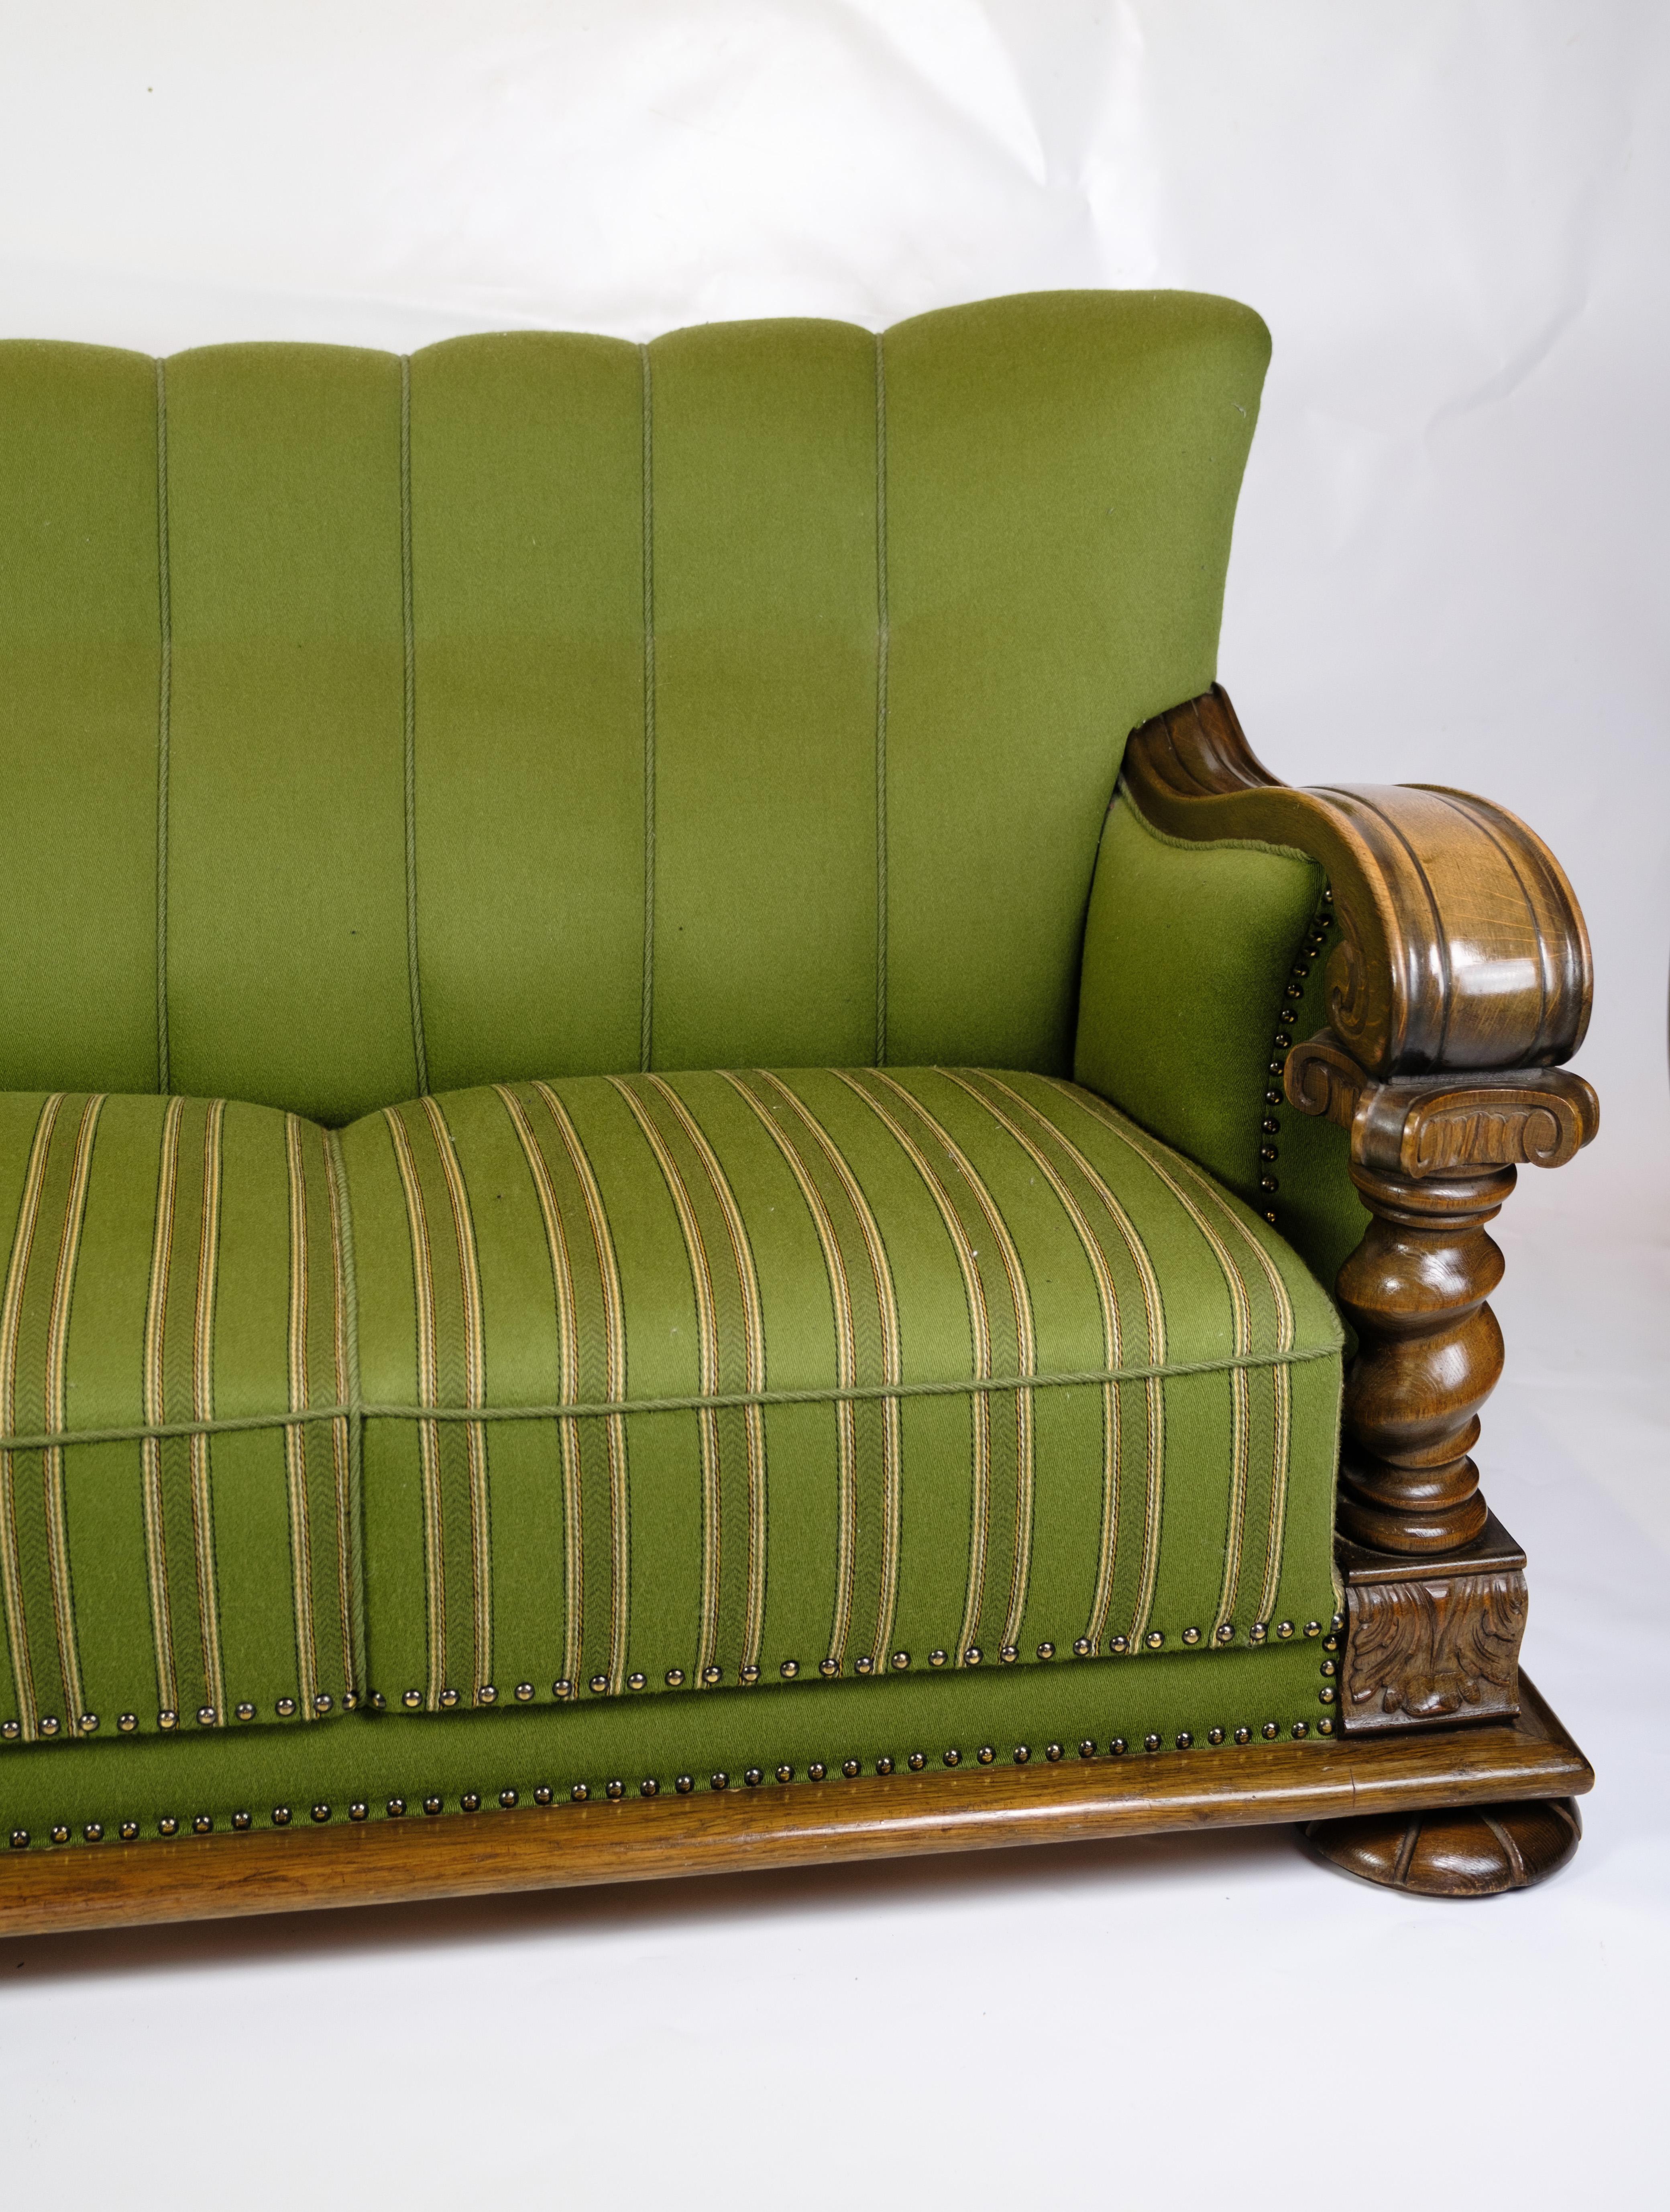 Transport Yourself to Renaissance Opulence: 1920s Sofa in Luxurious Green Upholstery

Indulge in the grandeur of the Renaissance era with this exquisite sofa, a testament to timeless elegance and meticulous craftsmanship.

Crafted around the 1920s,